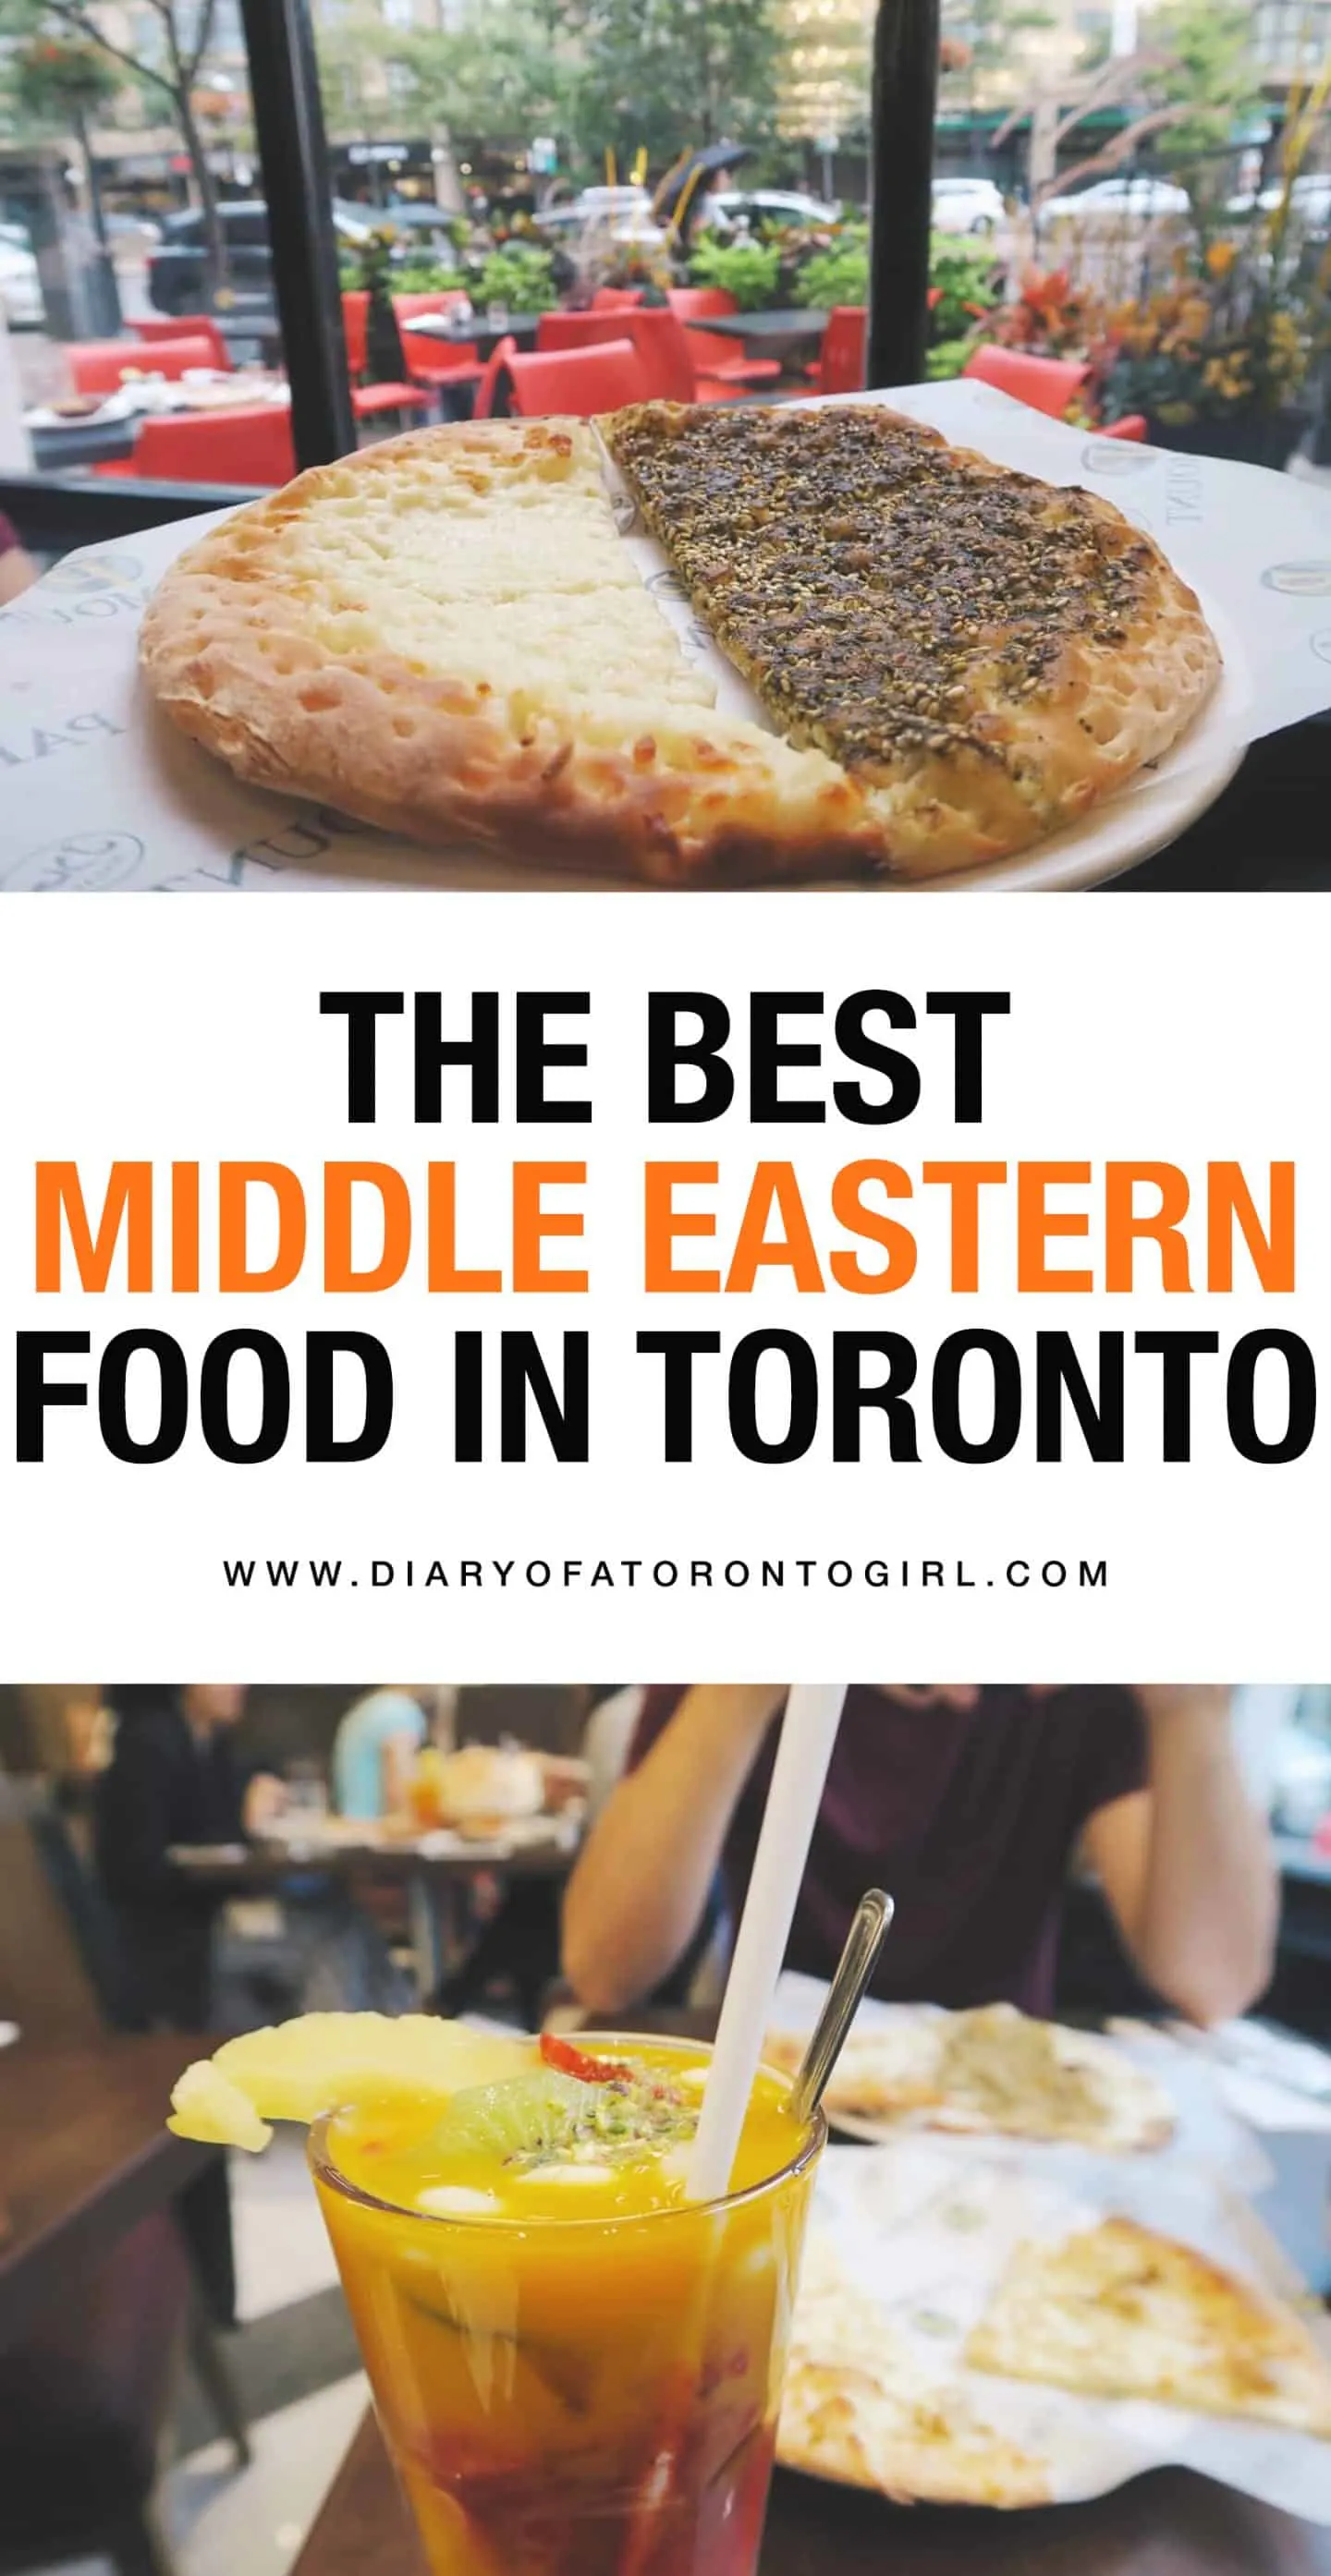 Looking for the best Middle Eastern food in Toronto? From manakeesh to baklava, Paramount Fine Foods serves up some of the best Middle Eastern cuisine.